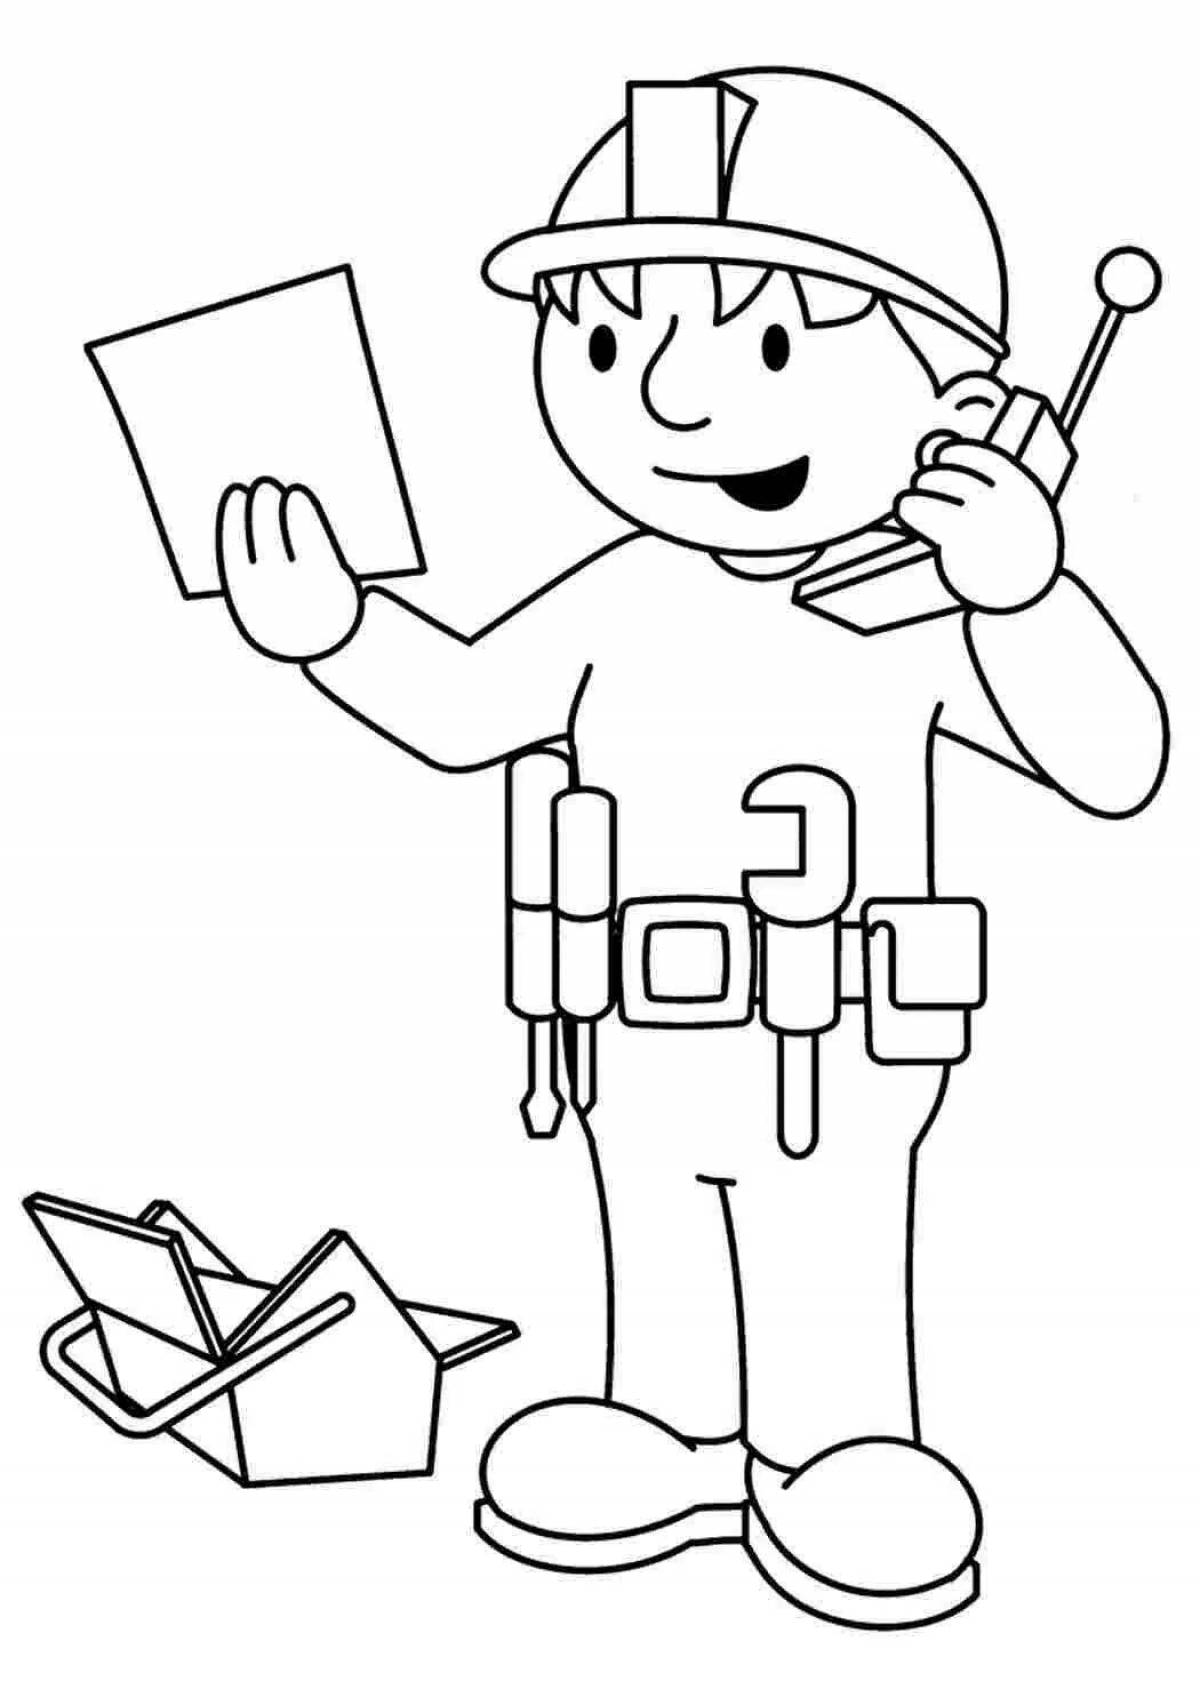 Creative engineer coloring book for kids